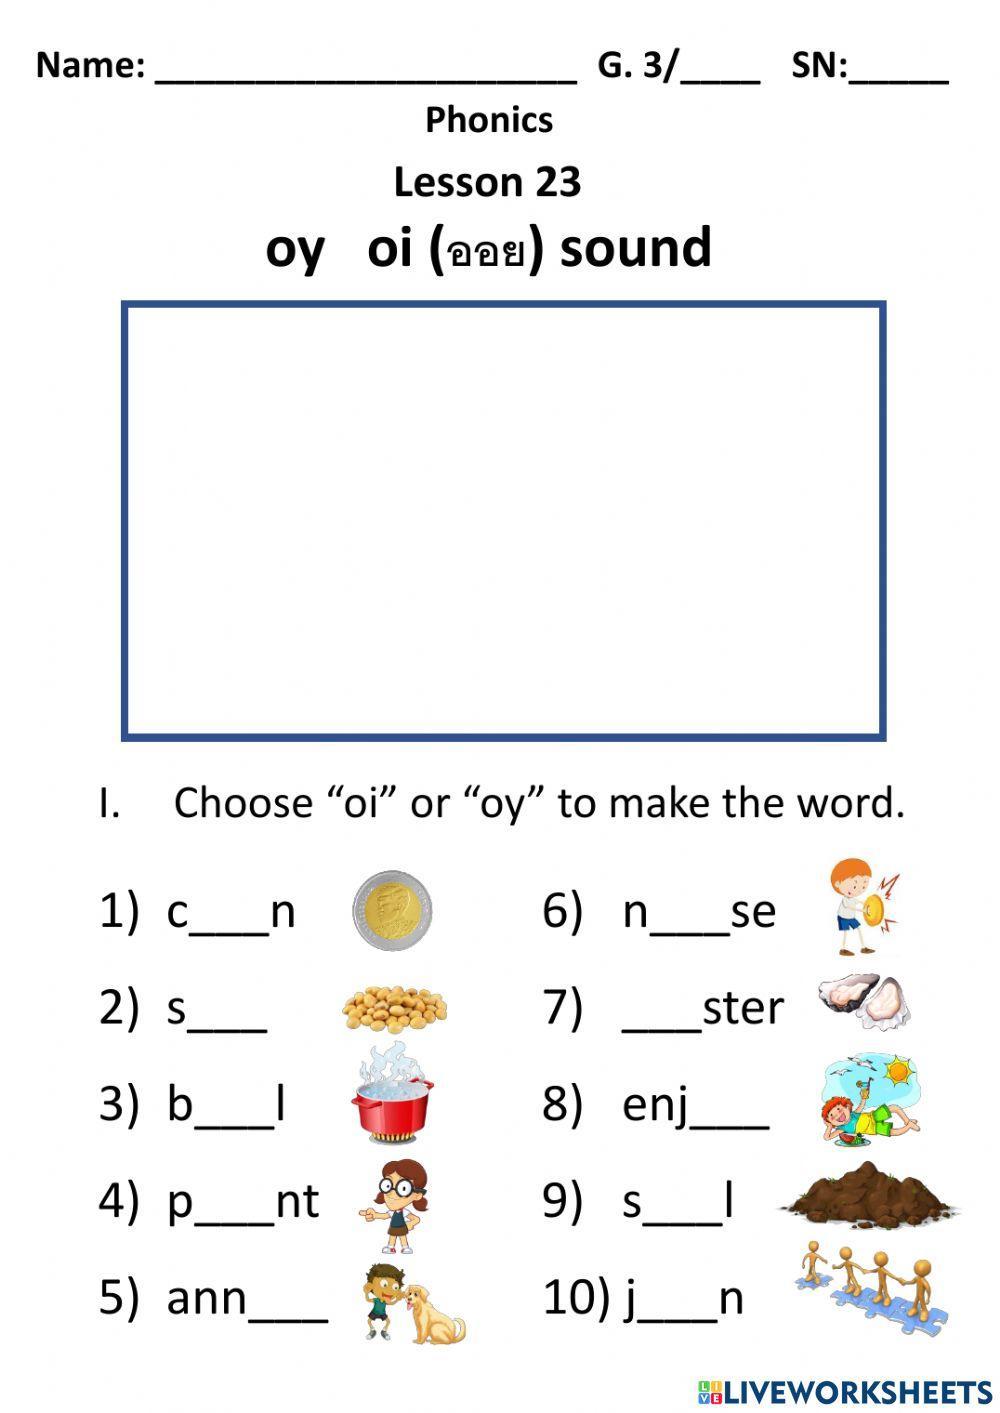 Oy and oi sound